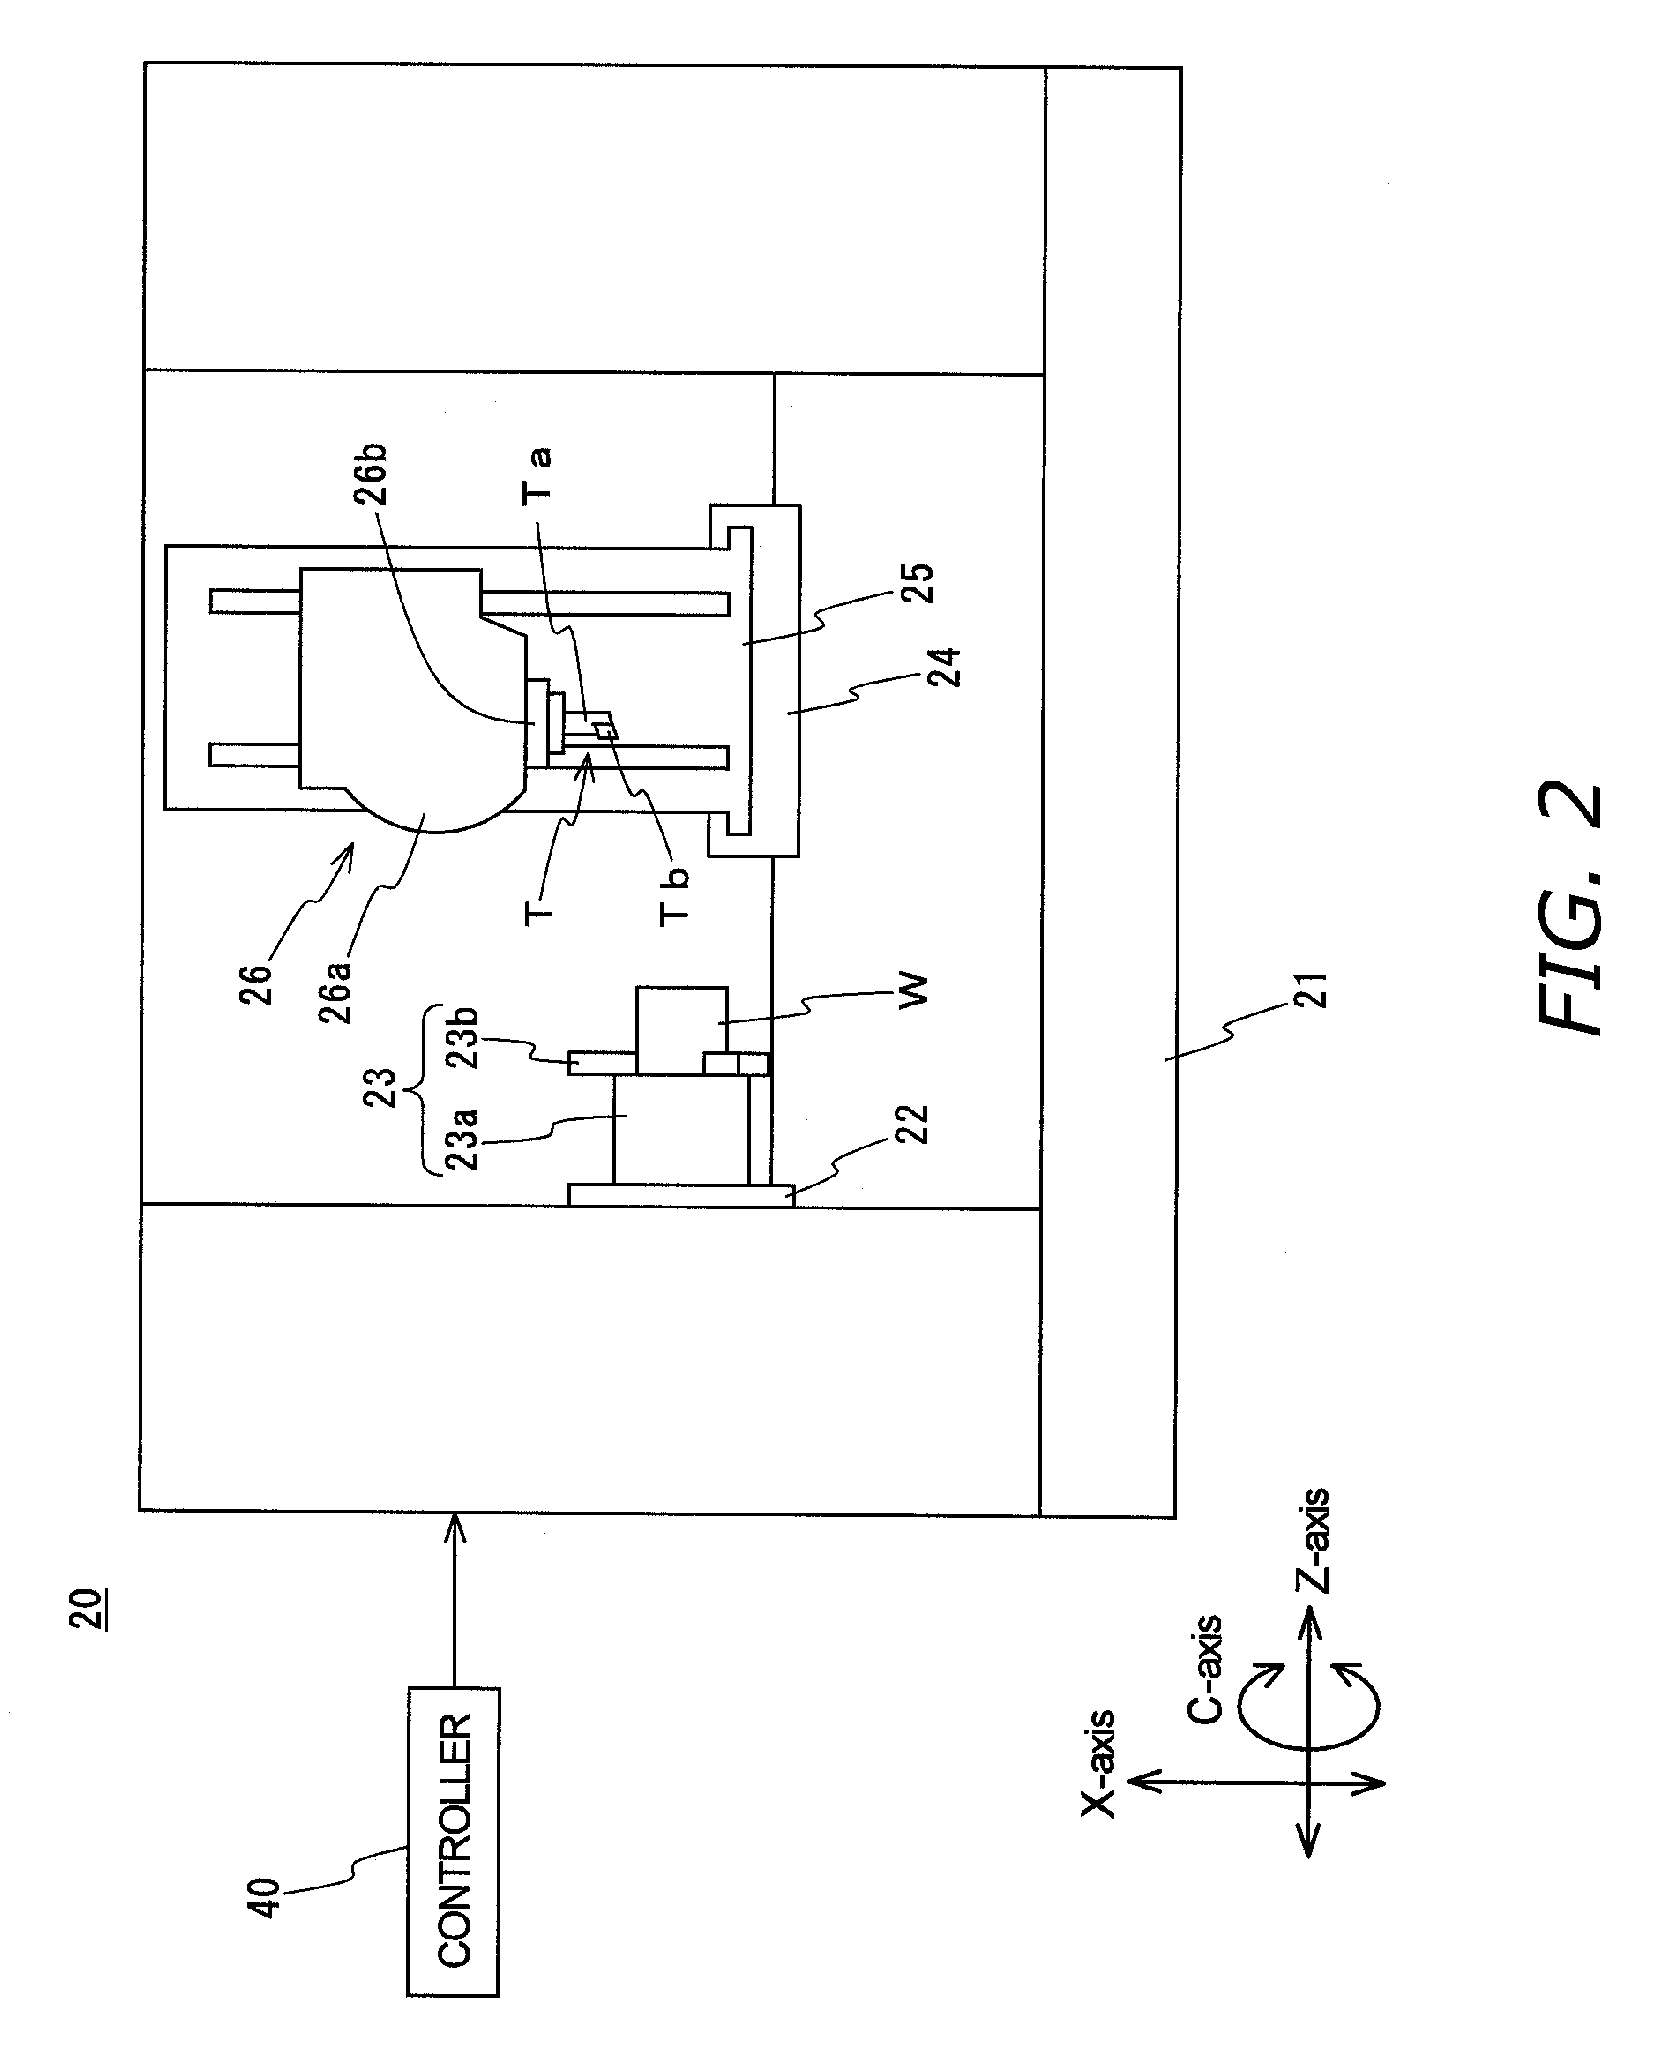 Interference checking device